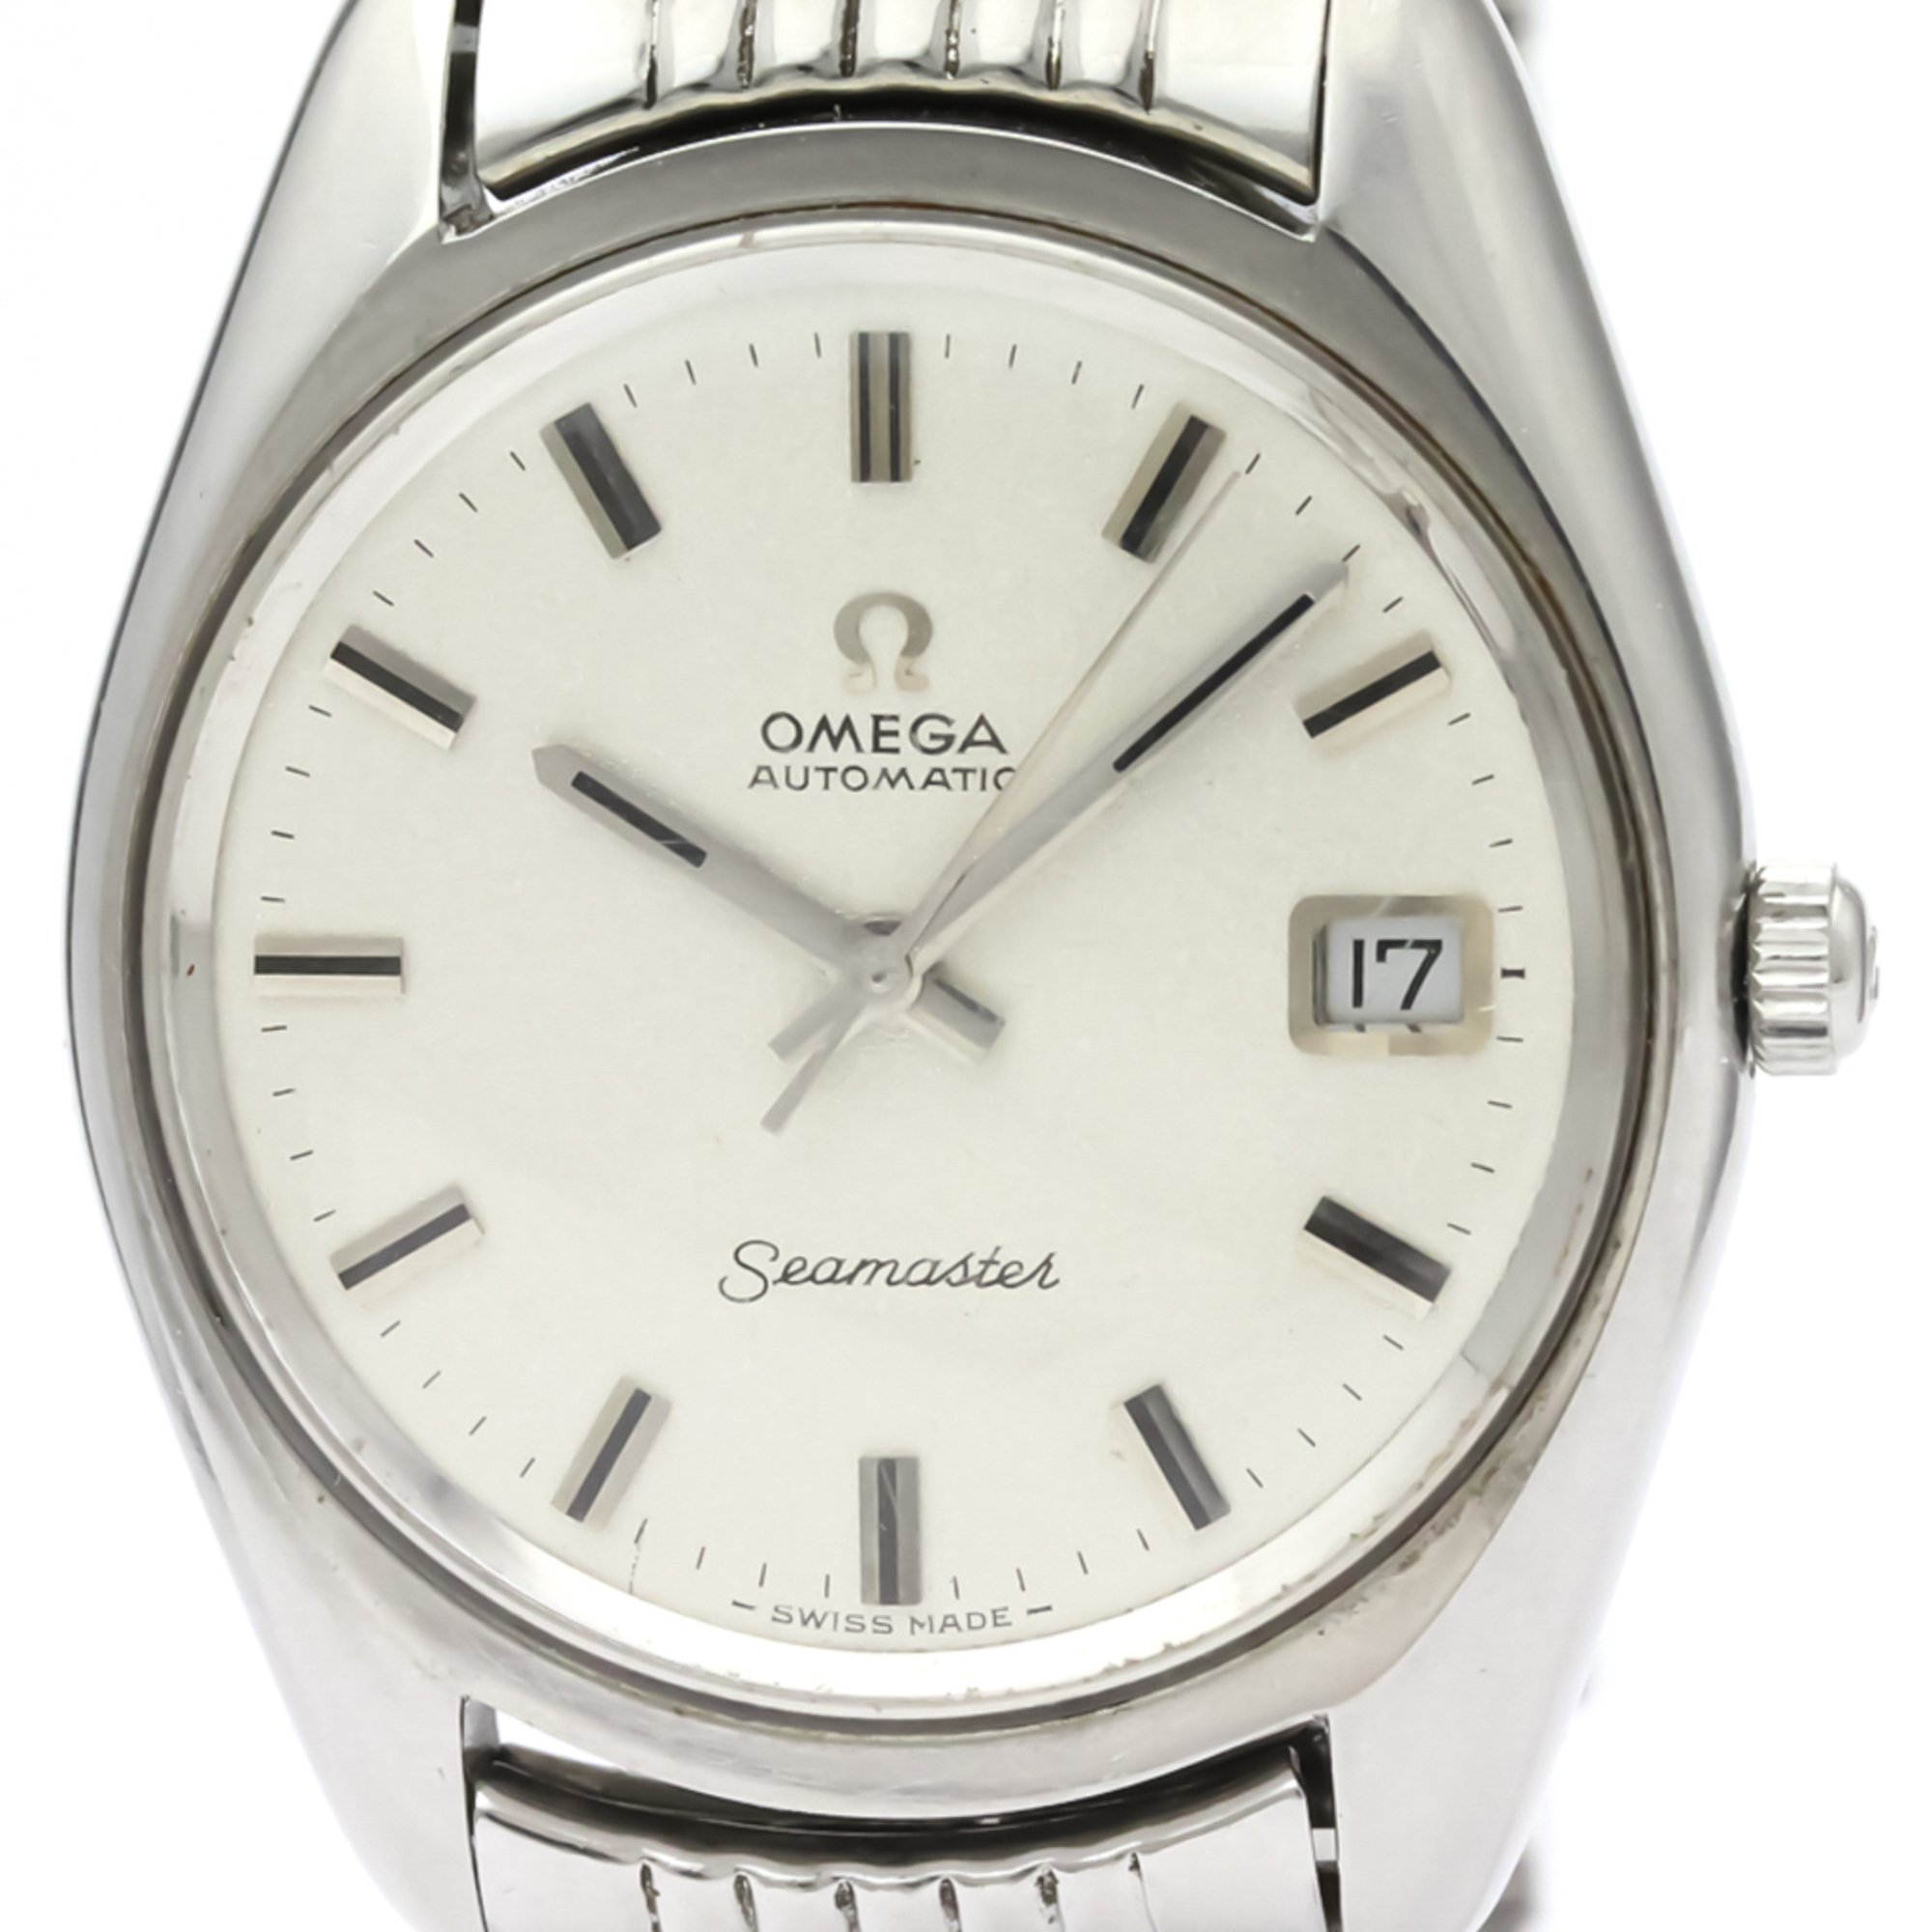 OMEGA Seamaster Steel Automatic Mens Watch 166.067